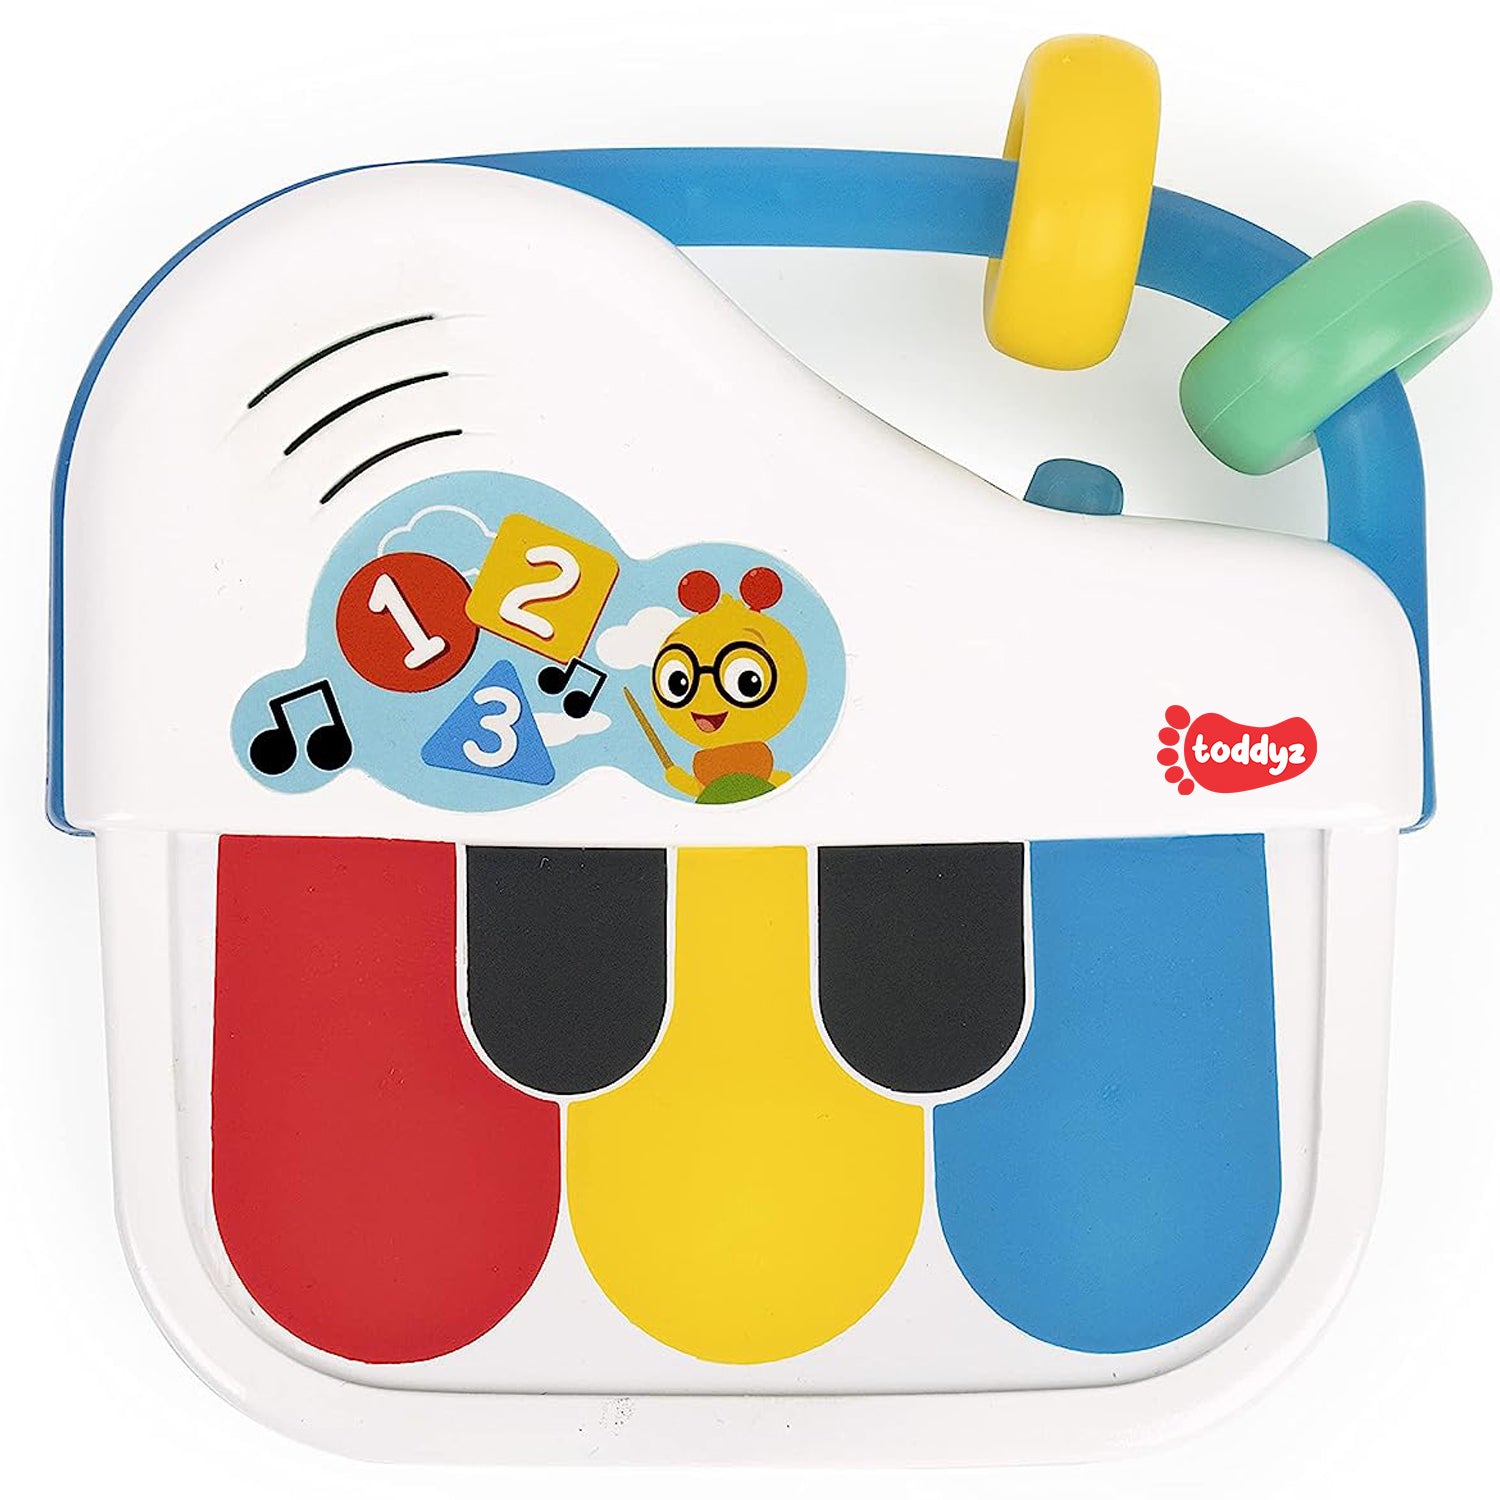 Toddyz Petit Piano Musical Toy: Magic Touch Technology, Shapes, Numbers, Ages 0 Months+